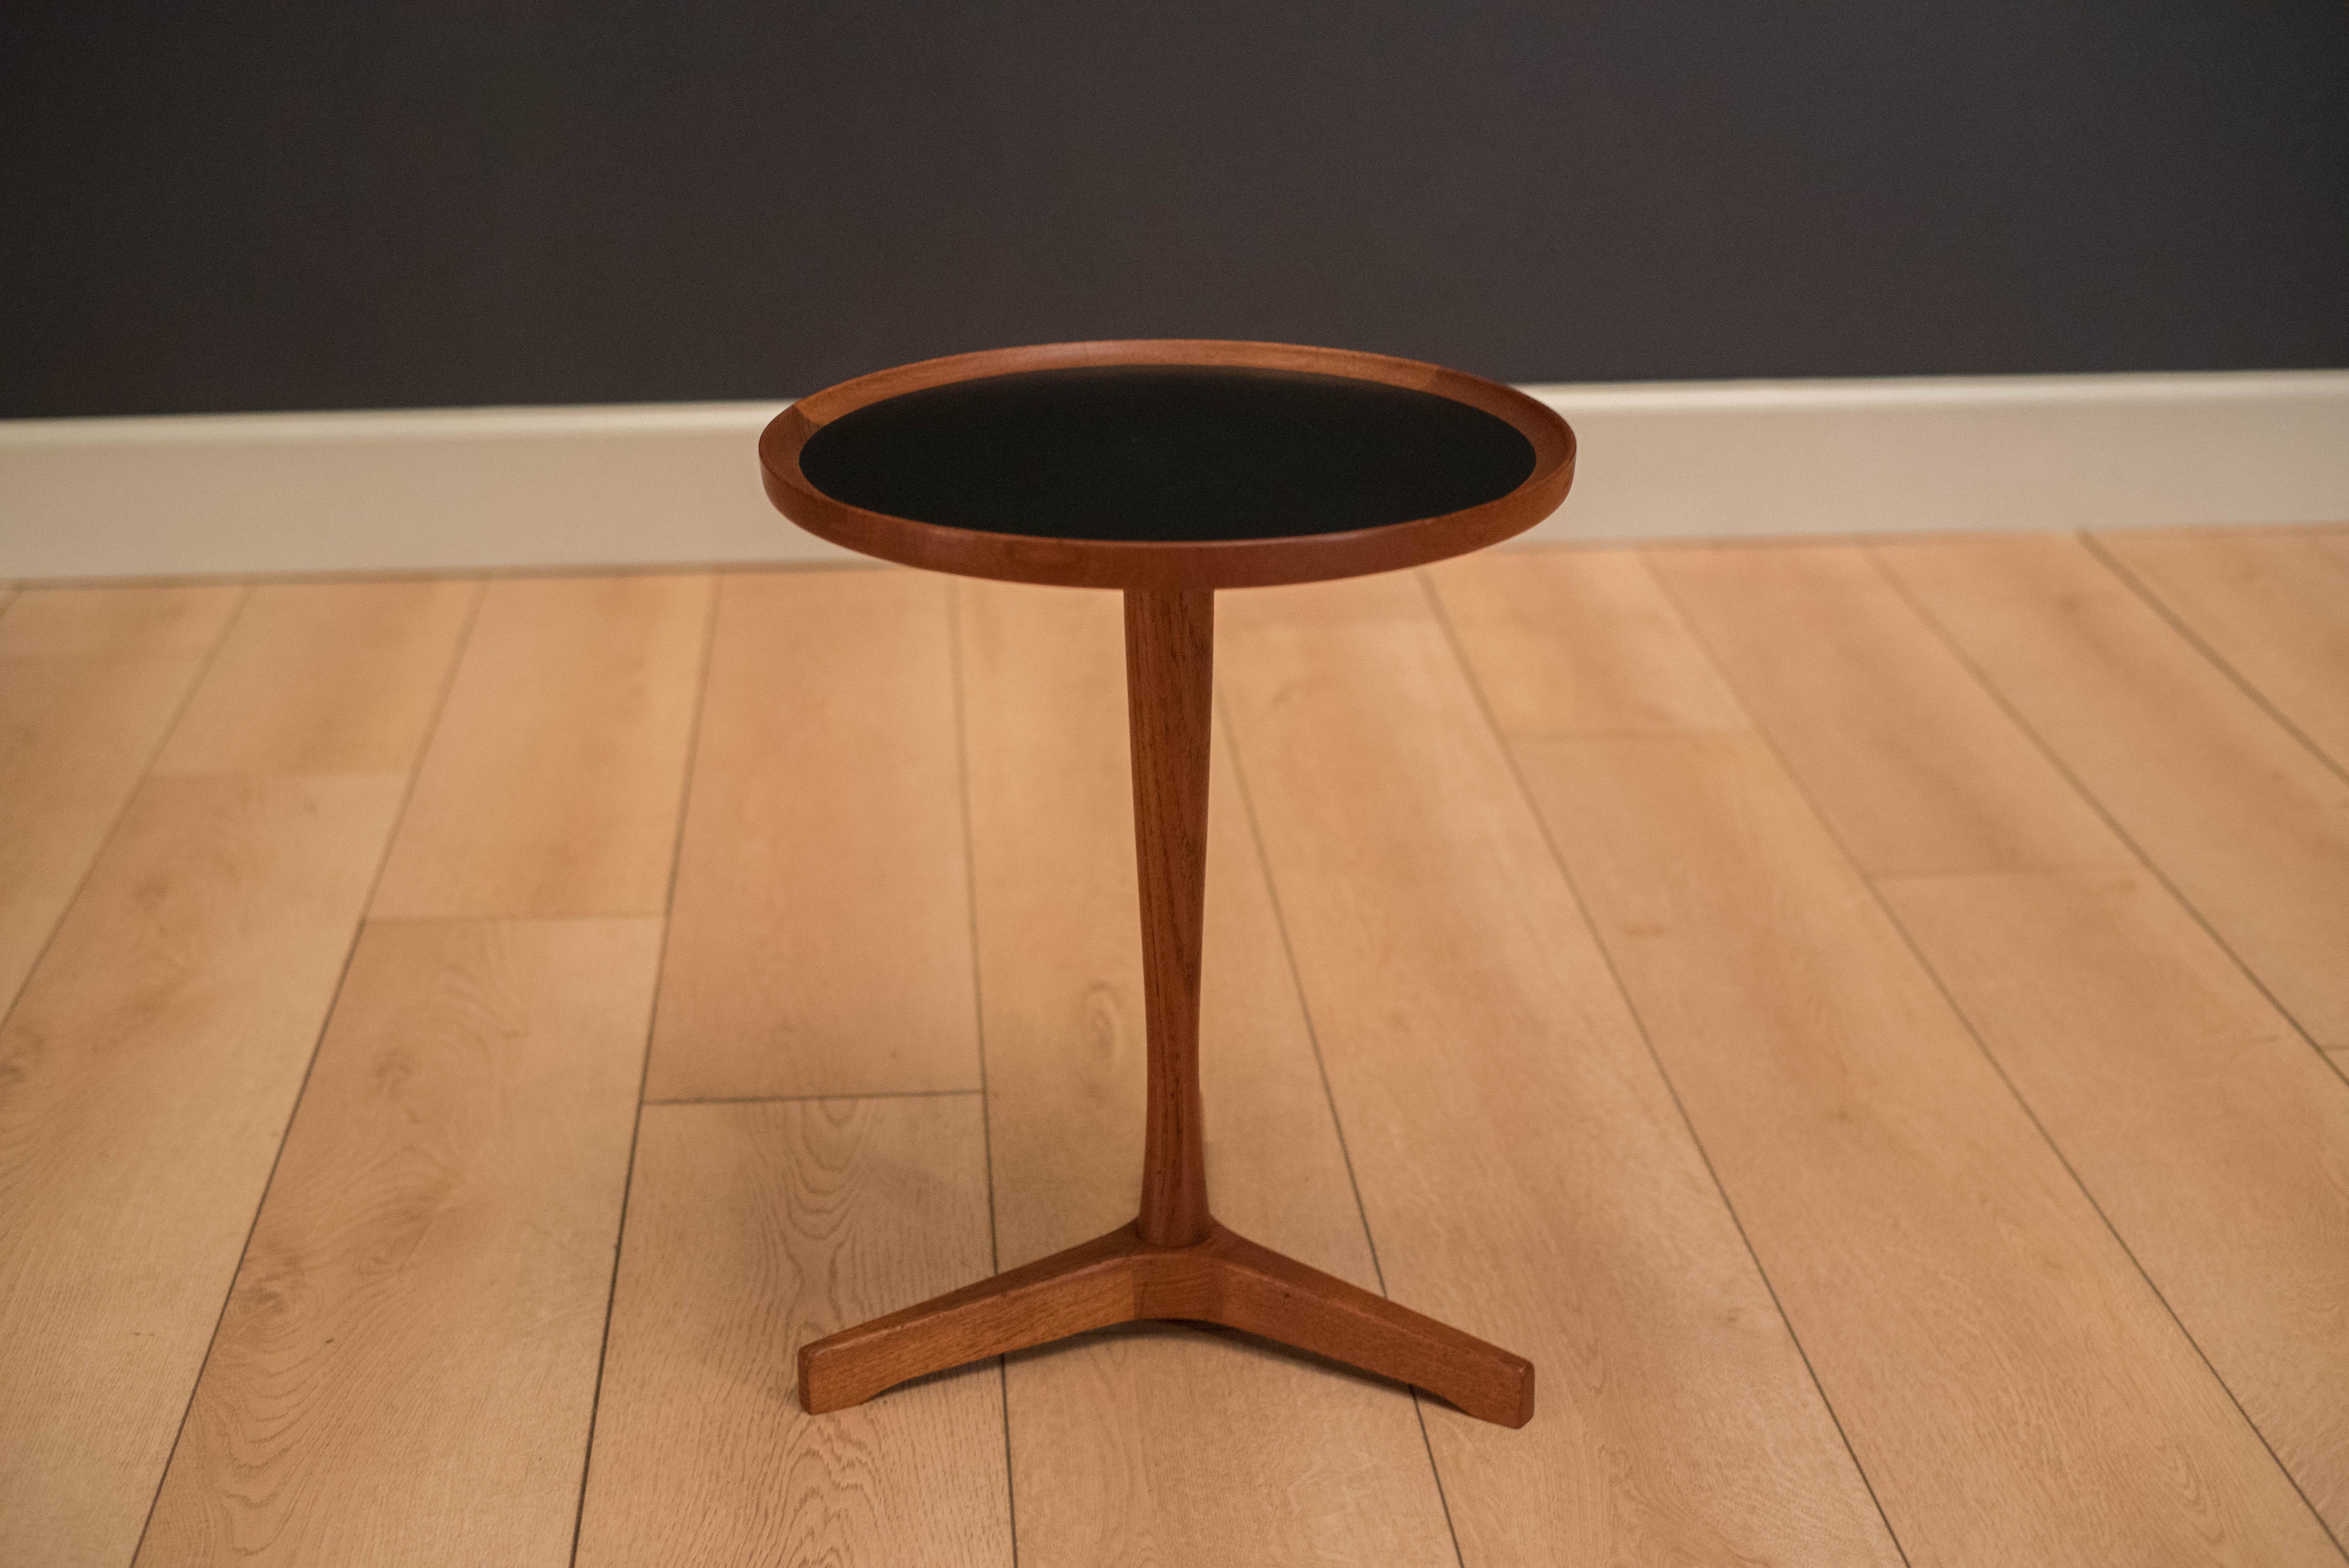 Mid-Century Modern side table designed by Hans C. Andersen for Artex. This piece has a black laminate inlaid top and a solid teak pedestal base.
 